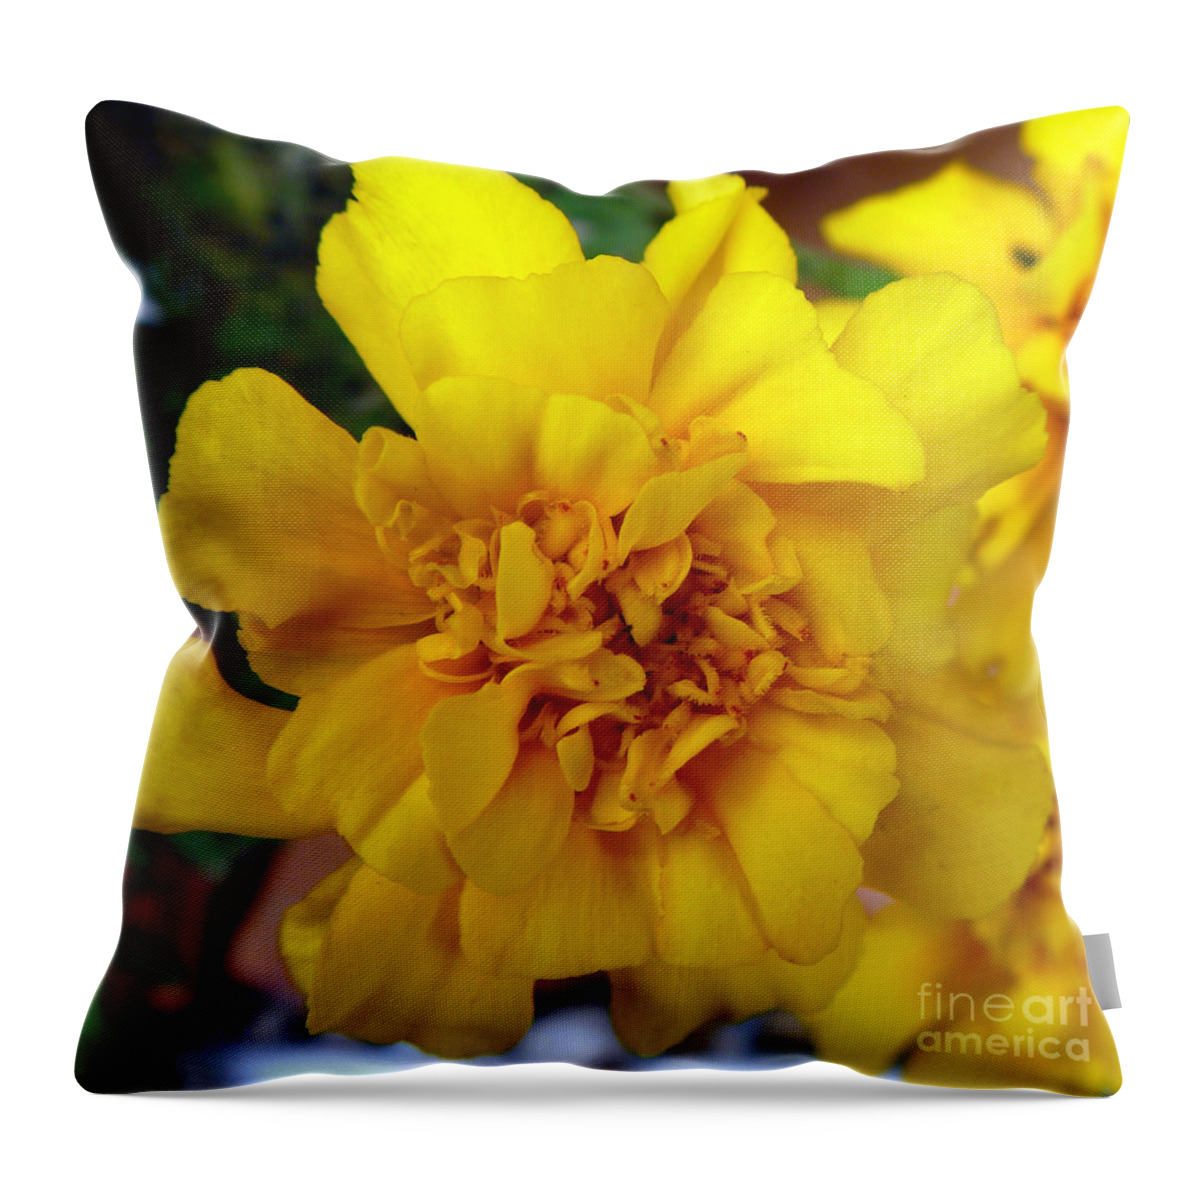 Autumn Throw Pillow featuring the photograph Autumn Marigold 2 by Alys Caviness-Gober